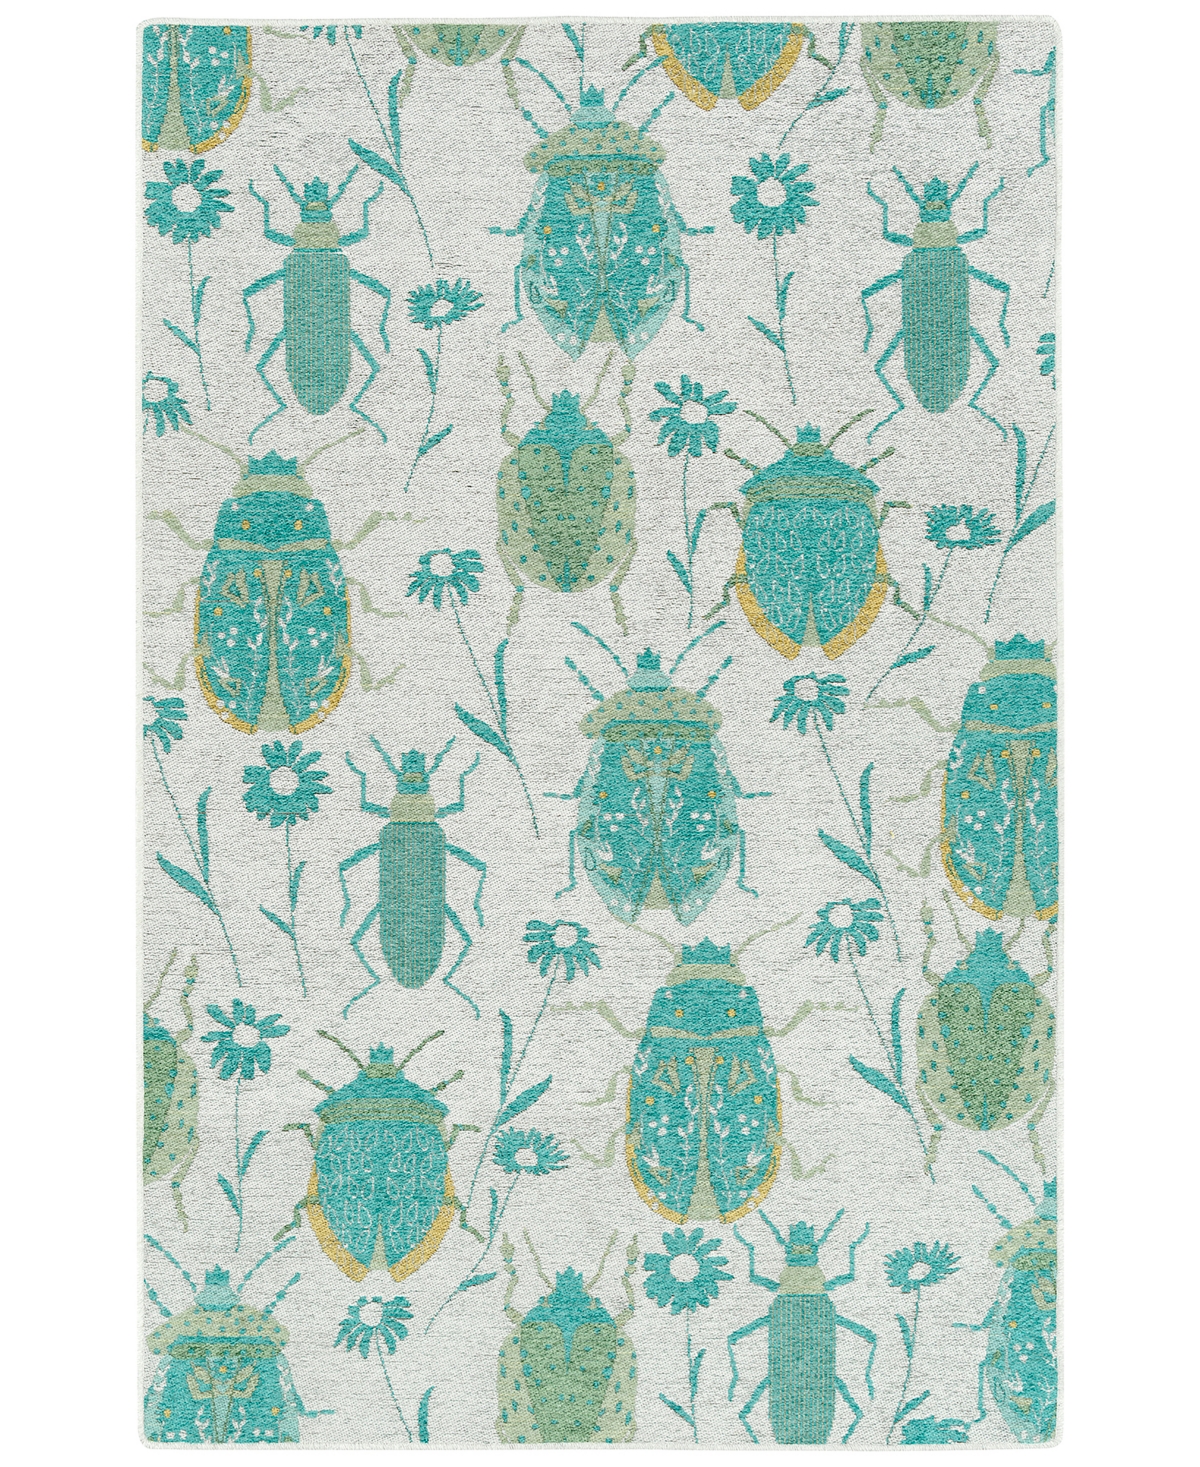 Hilary Farr Critter Comforts Hcc03-78 5' X 8' Area Rug In Turquoise